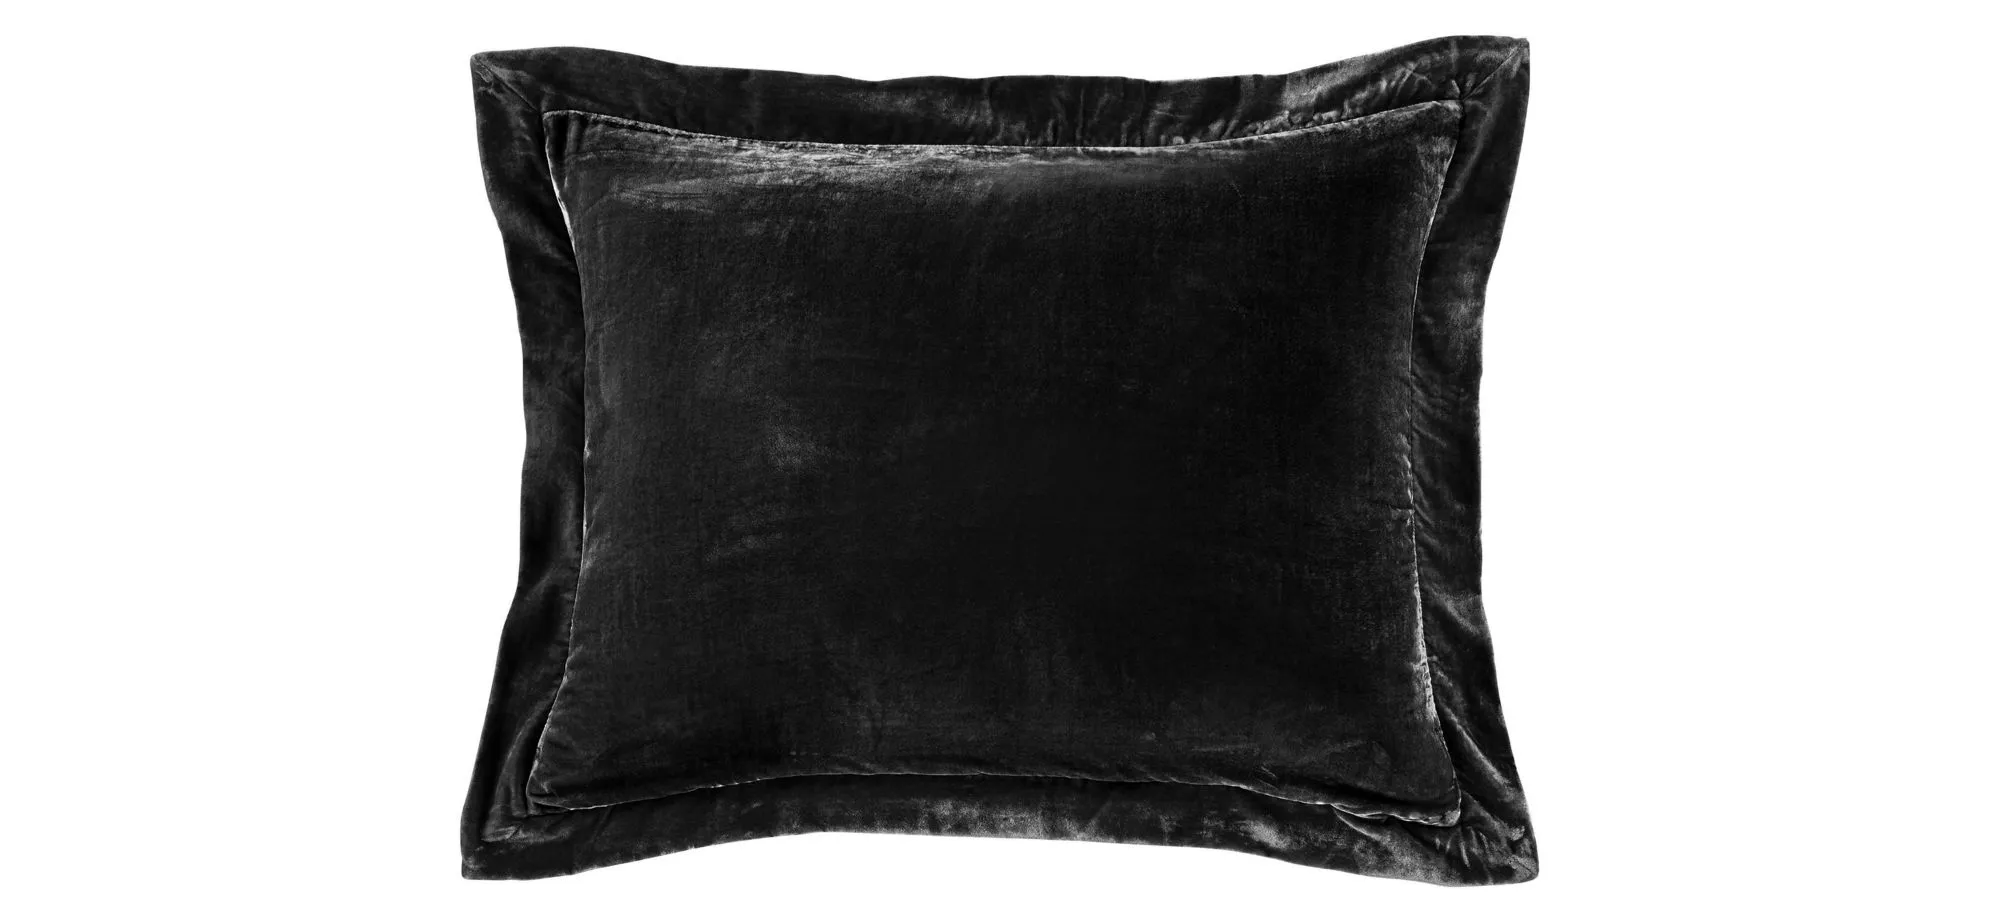 Sweet Delights Accent Pillow in Black by HiEnd Accents